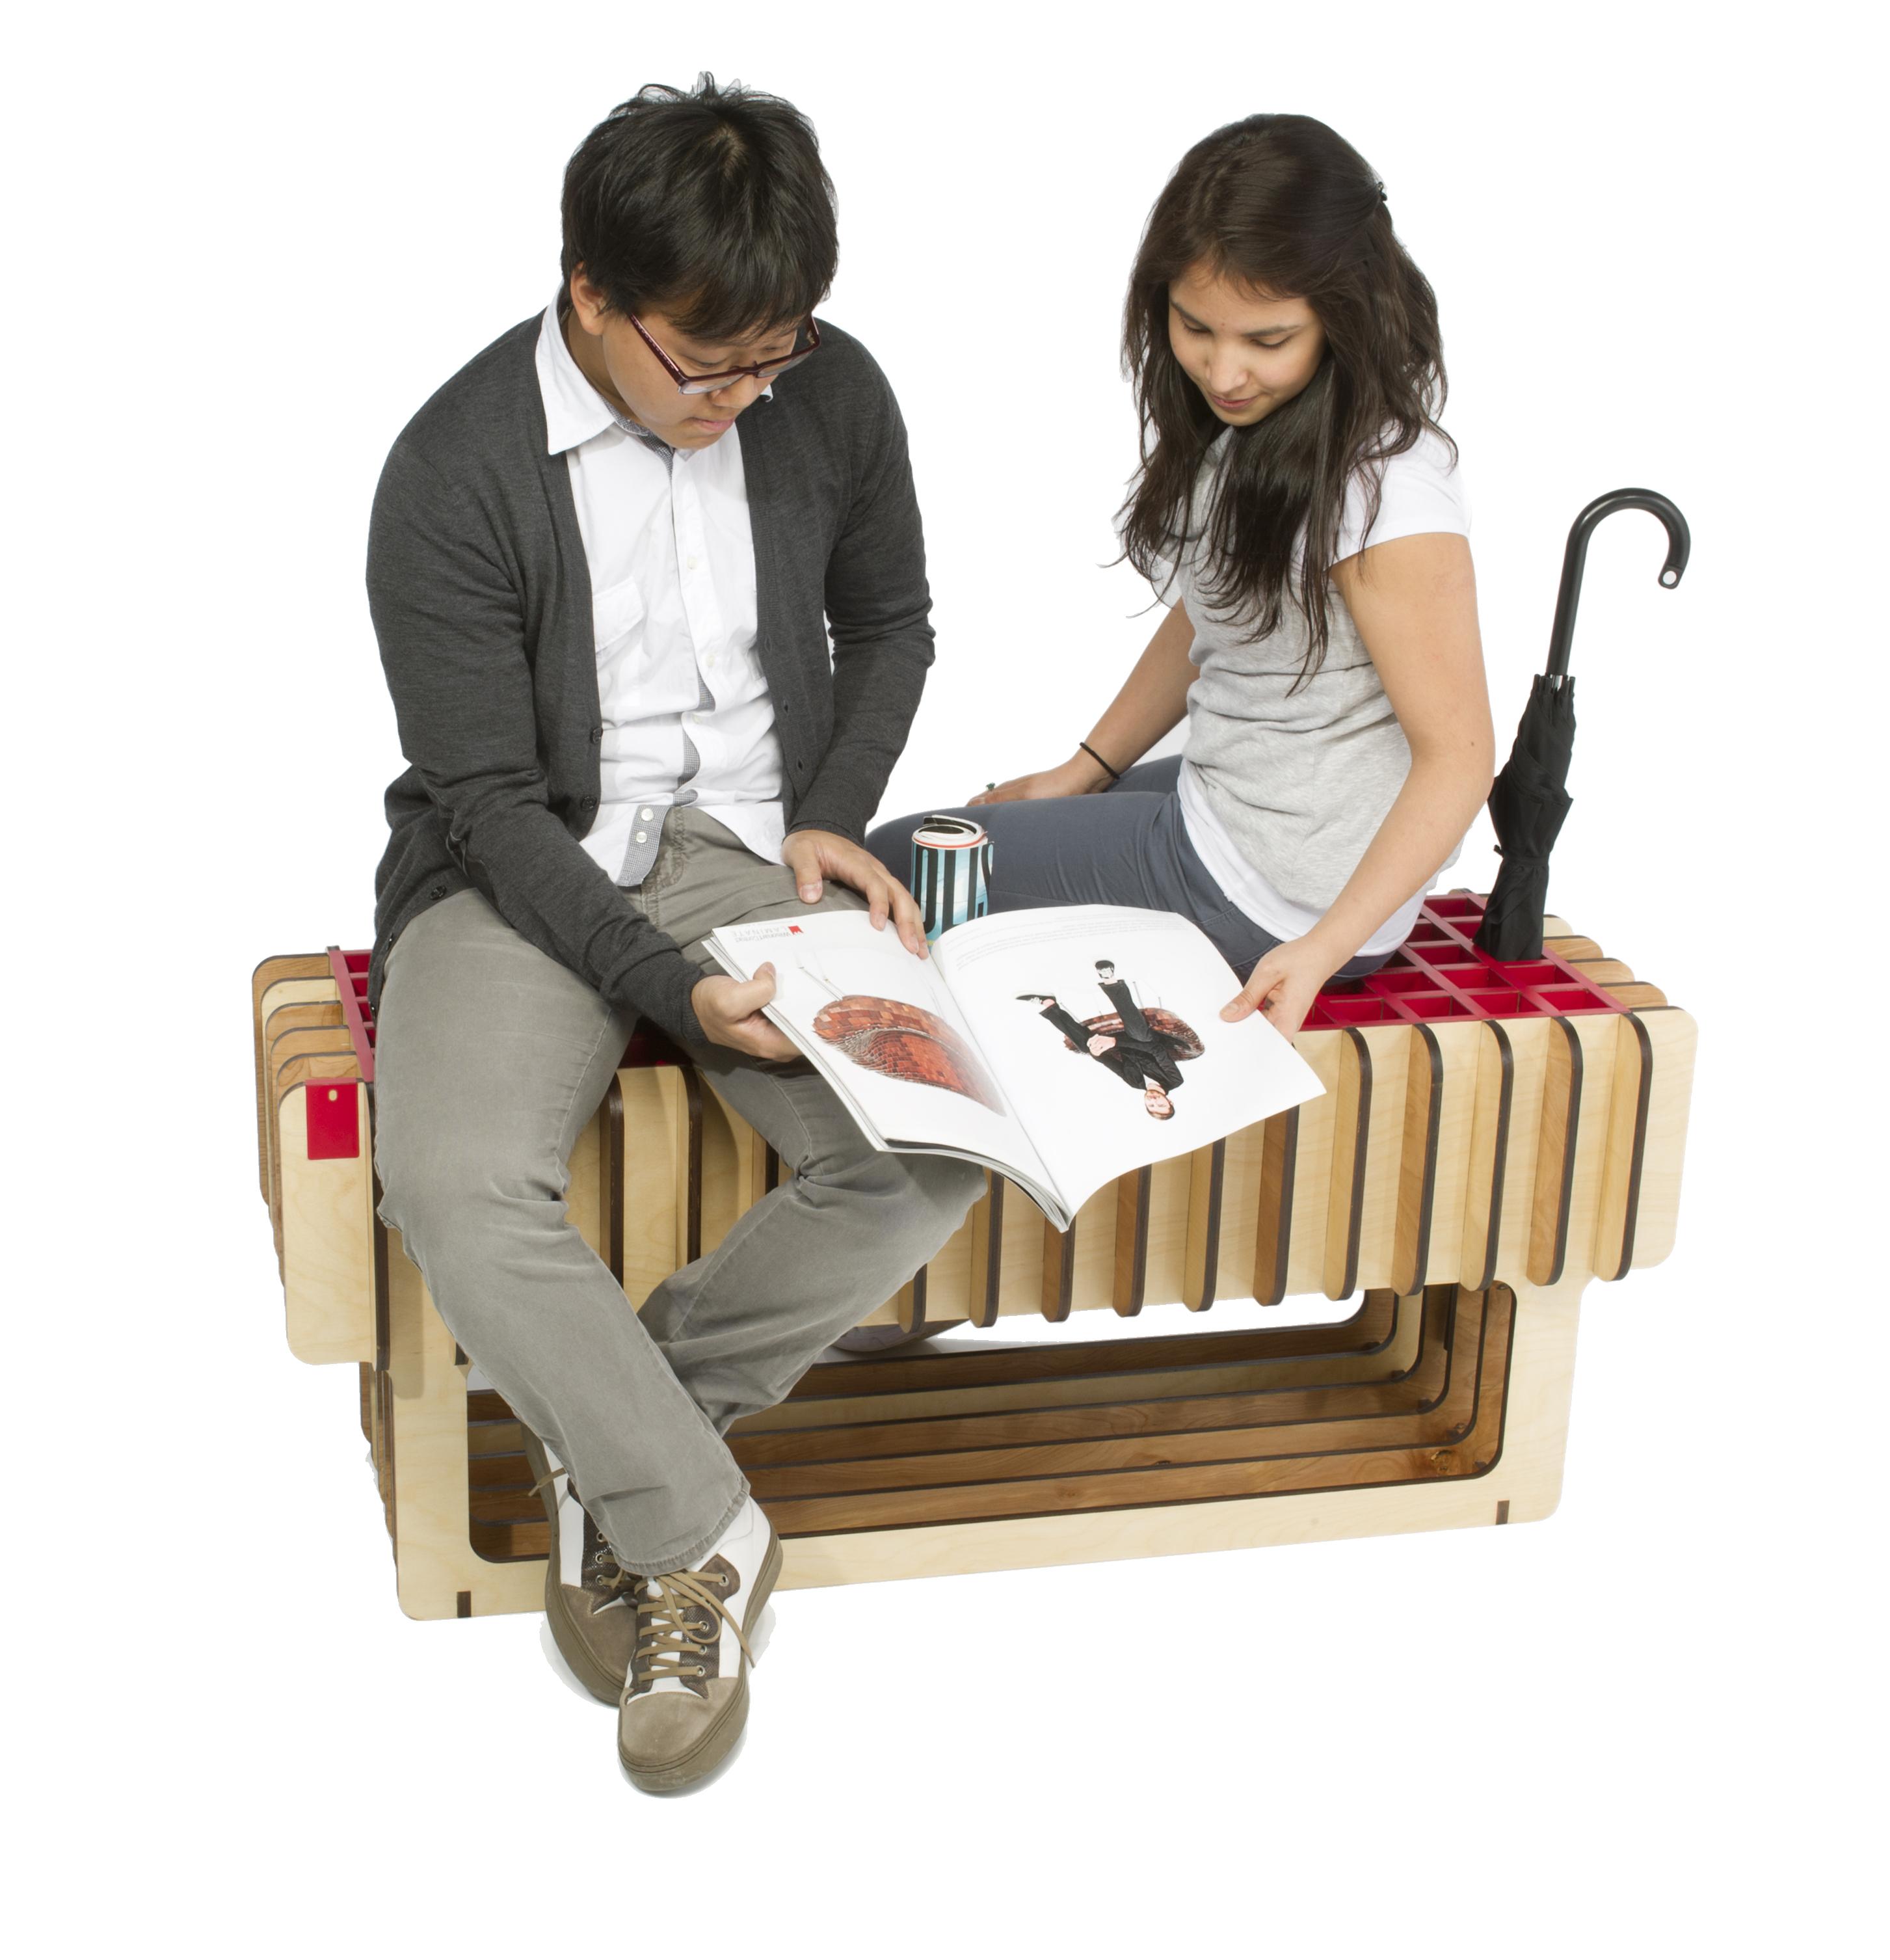 A bench with holes to store items like umbrellas.